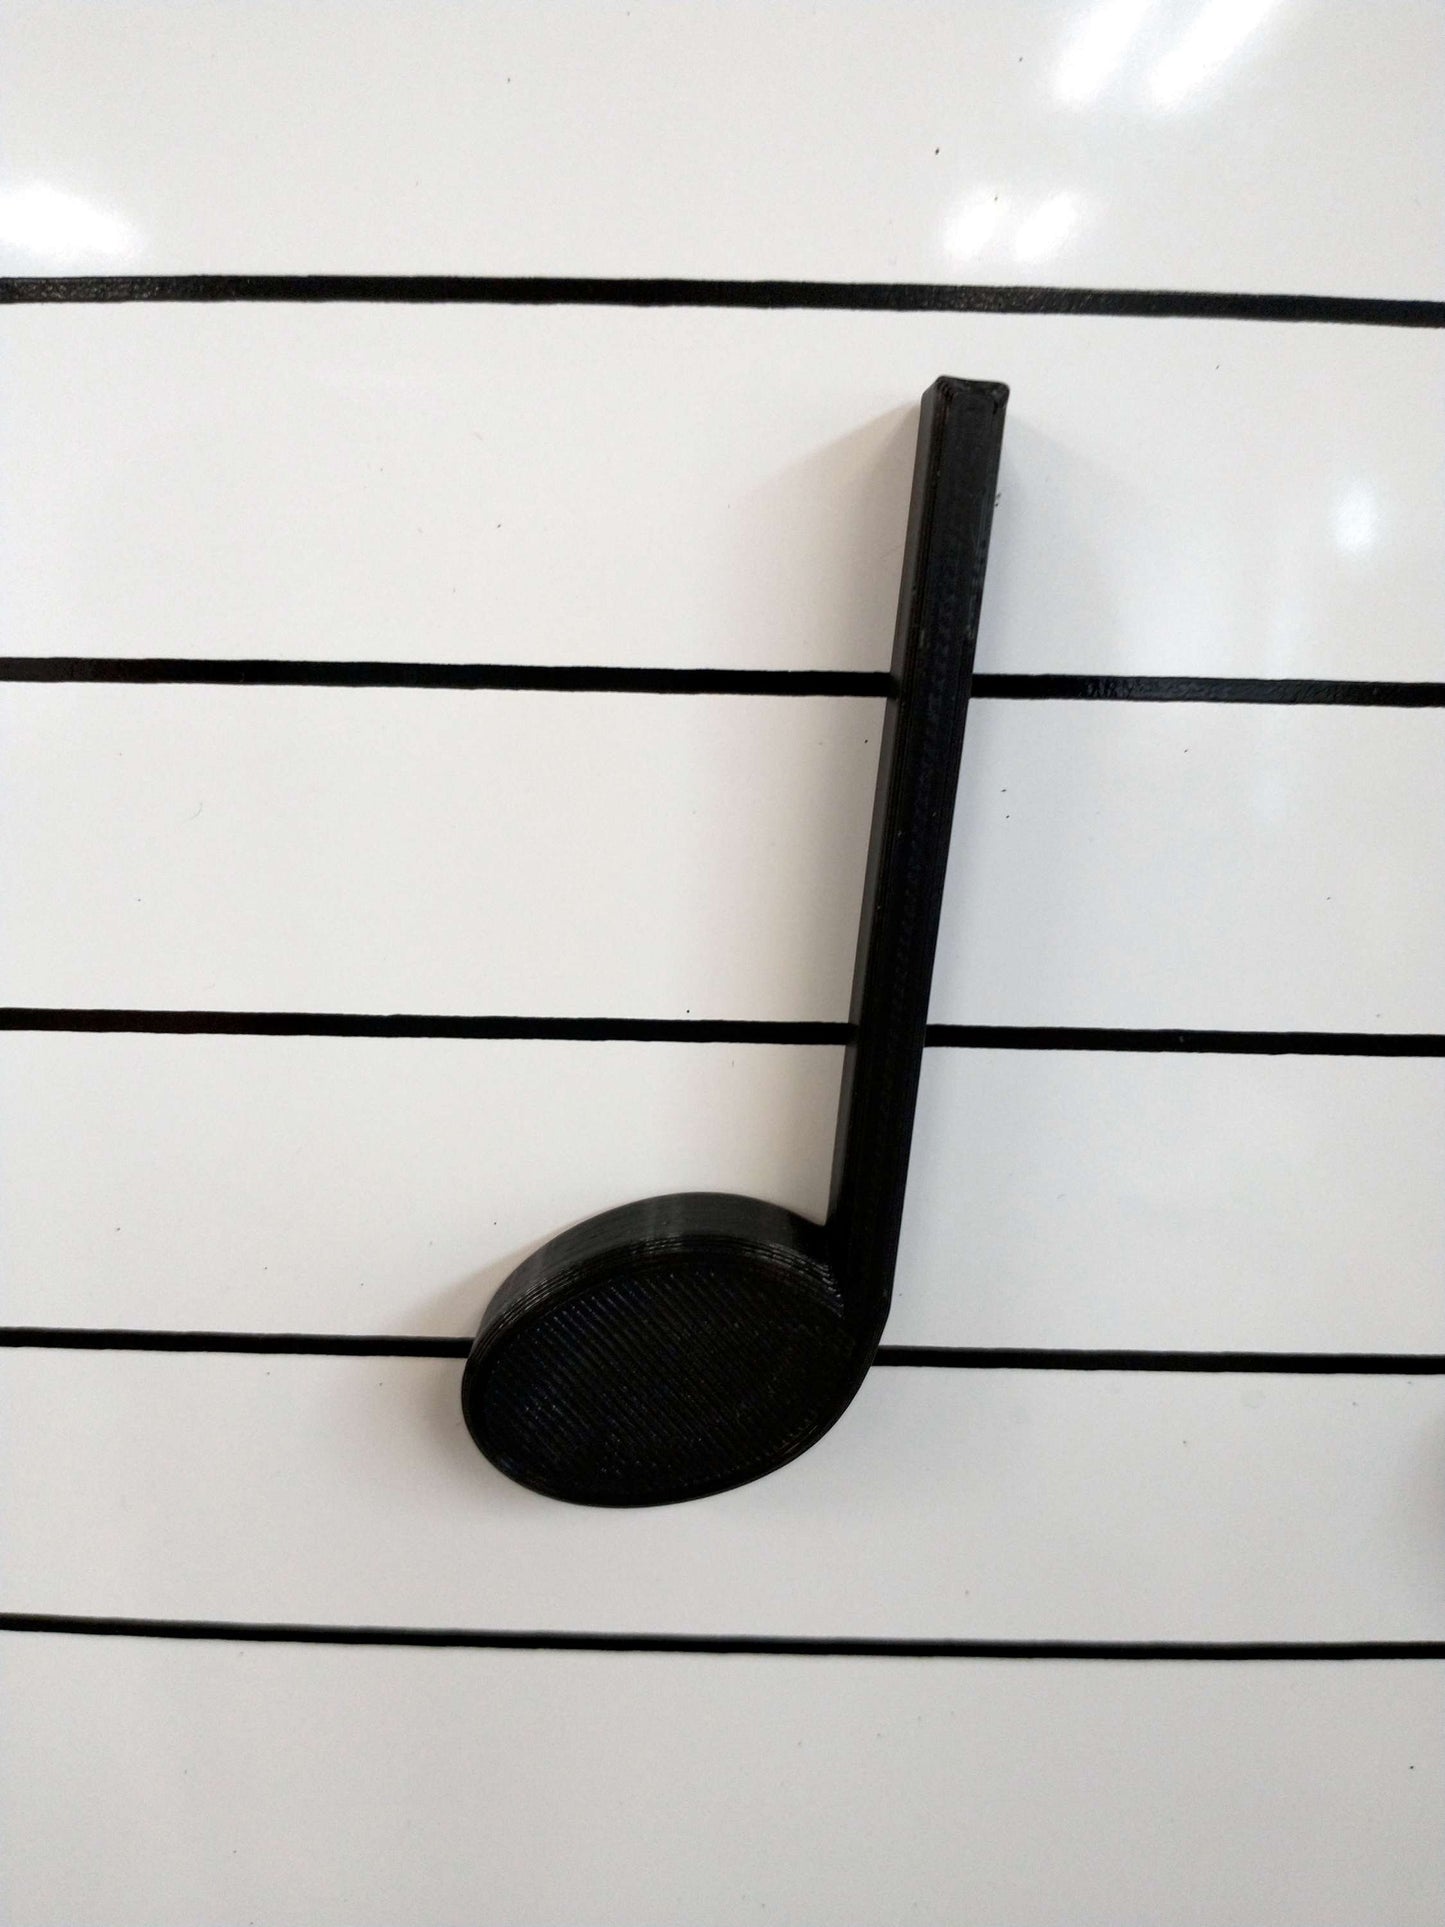 Individual 3D Music Notes Magnetic